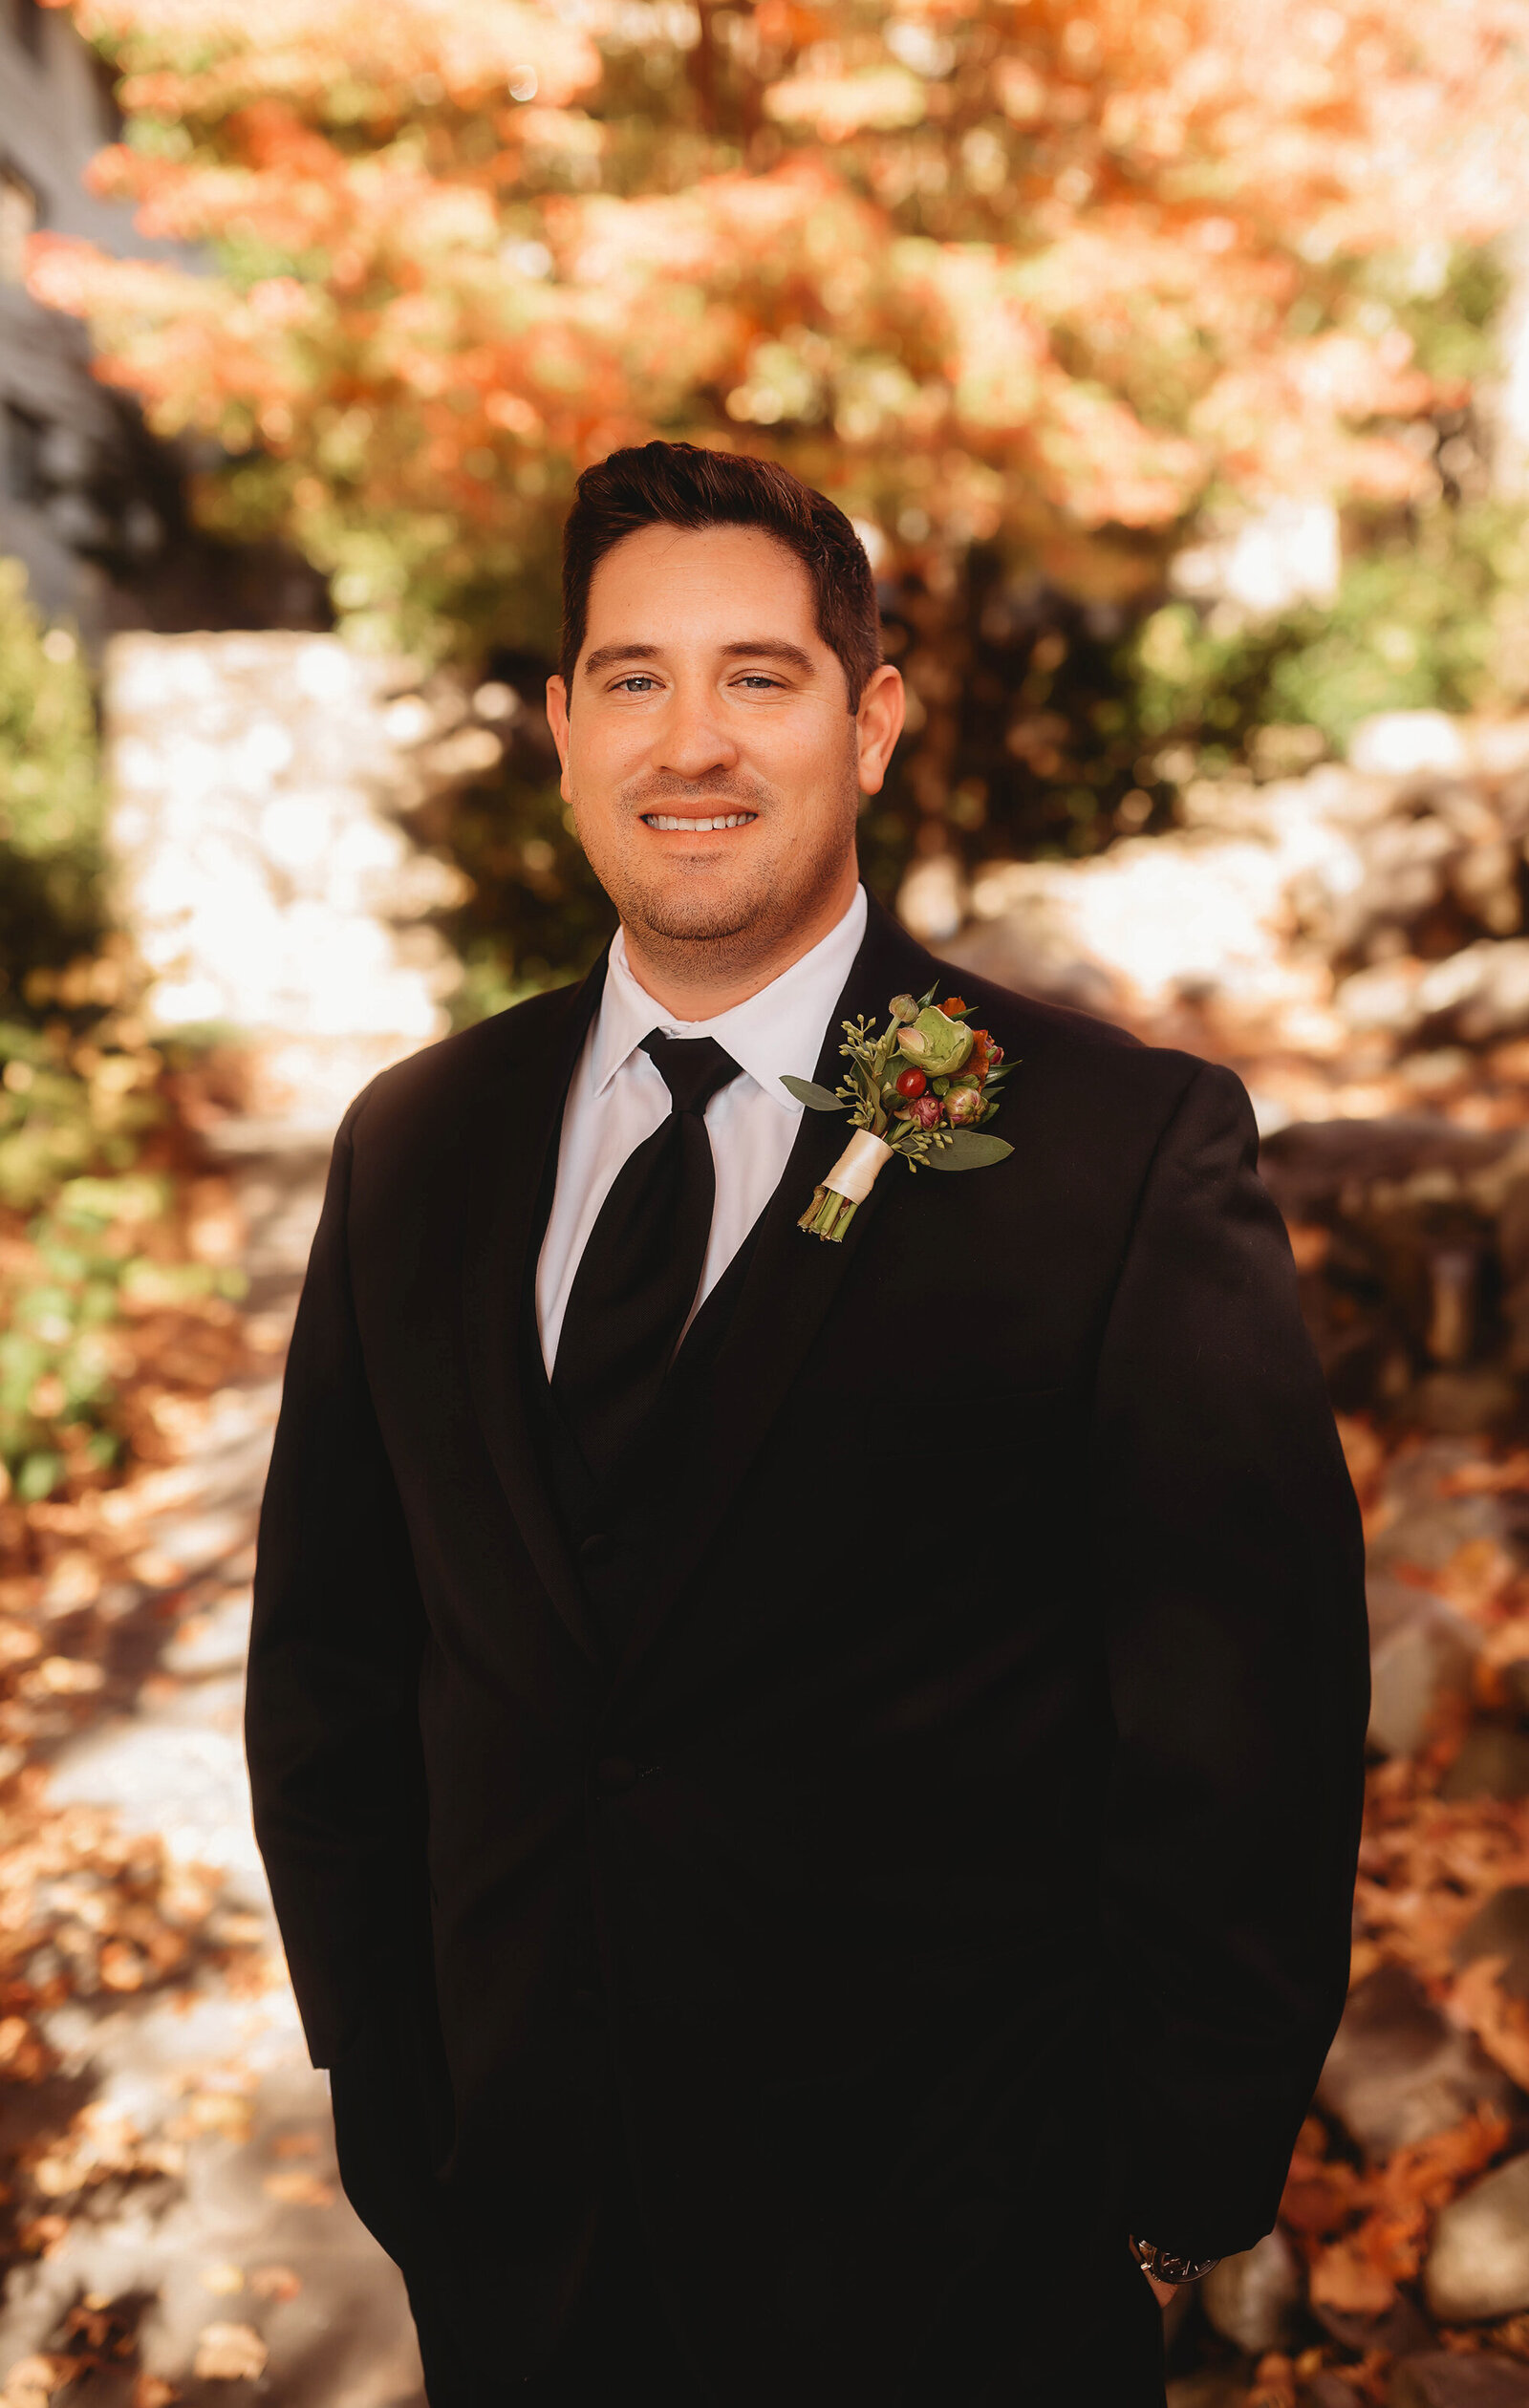 Groom poses for portraits before his Elopement Ceremony at Grove Park Inn in Asheville, NC.